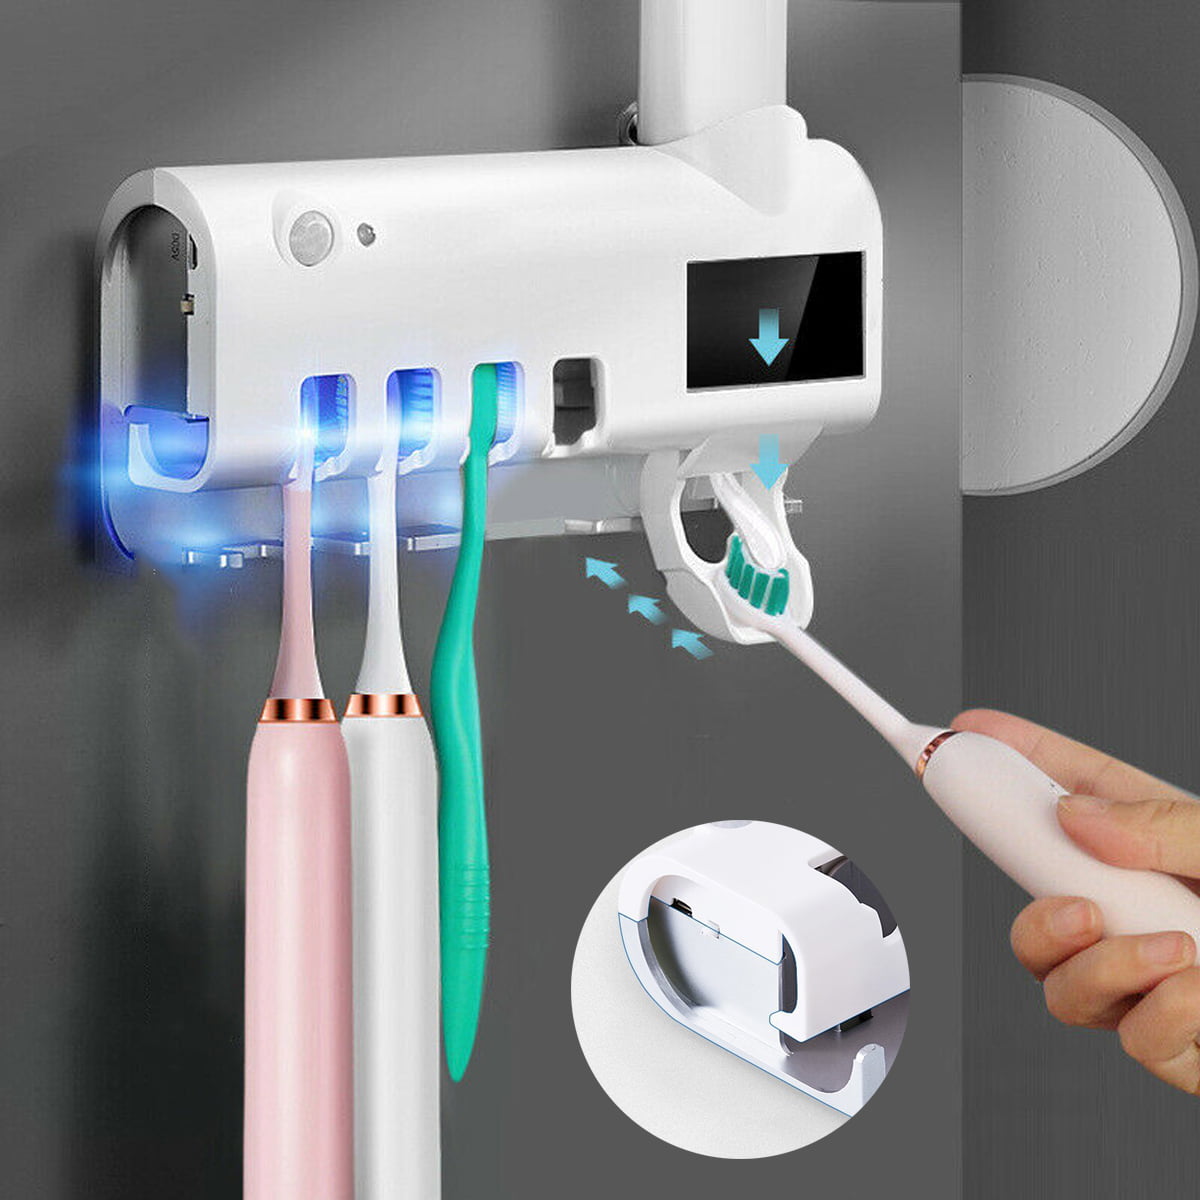 Avari Dual UV & Heat Premium Toothbrush Sanitizer AC Adapter plus Toothpaste Holder White with Stand and Wall Mount Antibacterial Germ Free Sterilizer for Toothbrush and Razor Hygiene